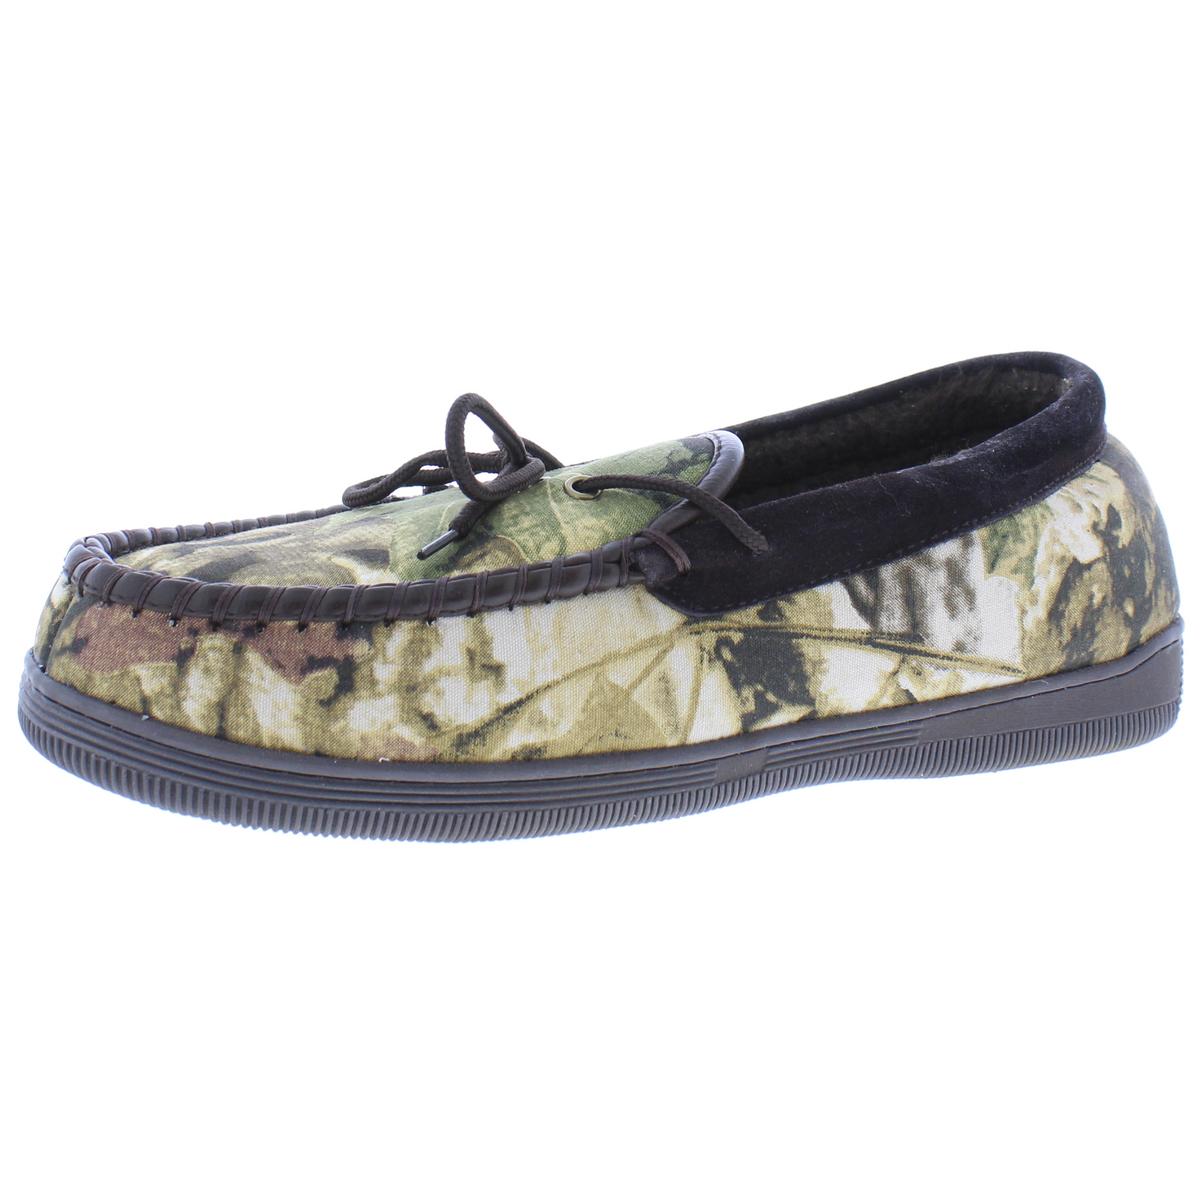 Slippers International Mens Camo Green Moccasin Slippers 13 Extra Wide ...